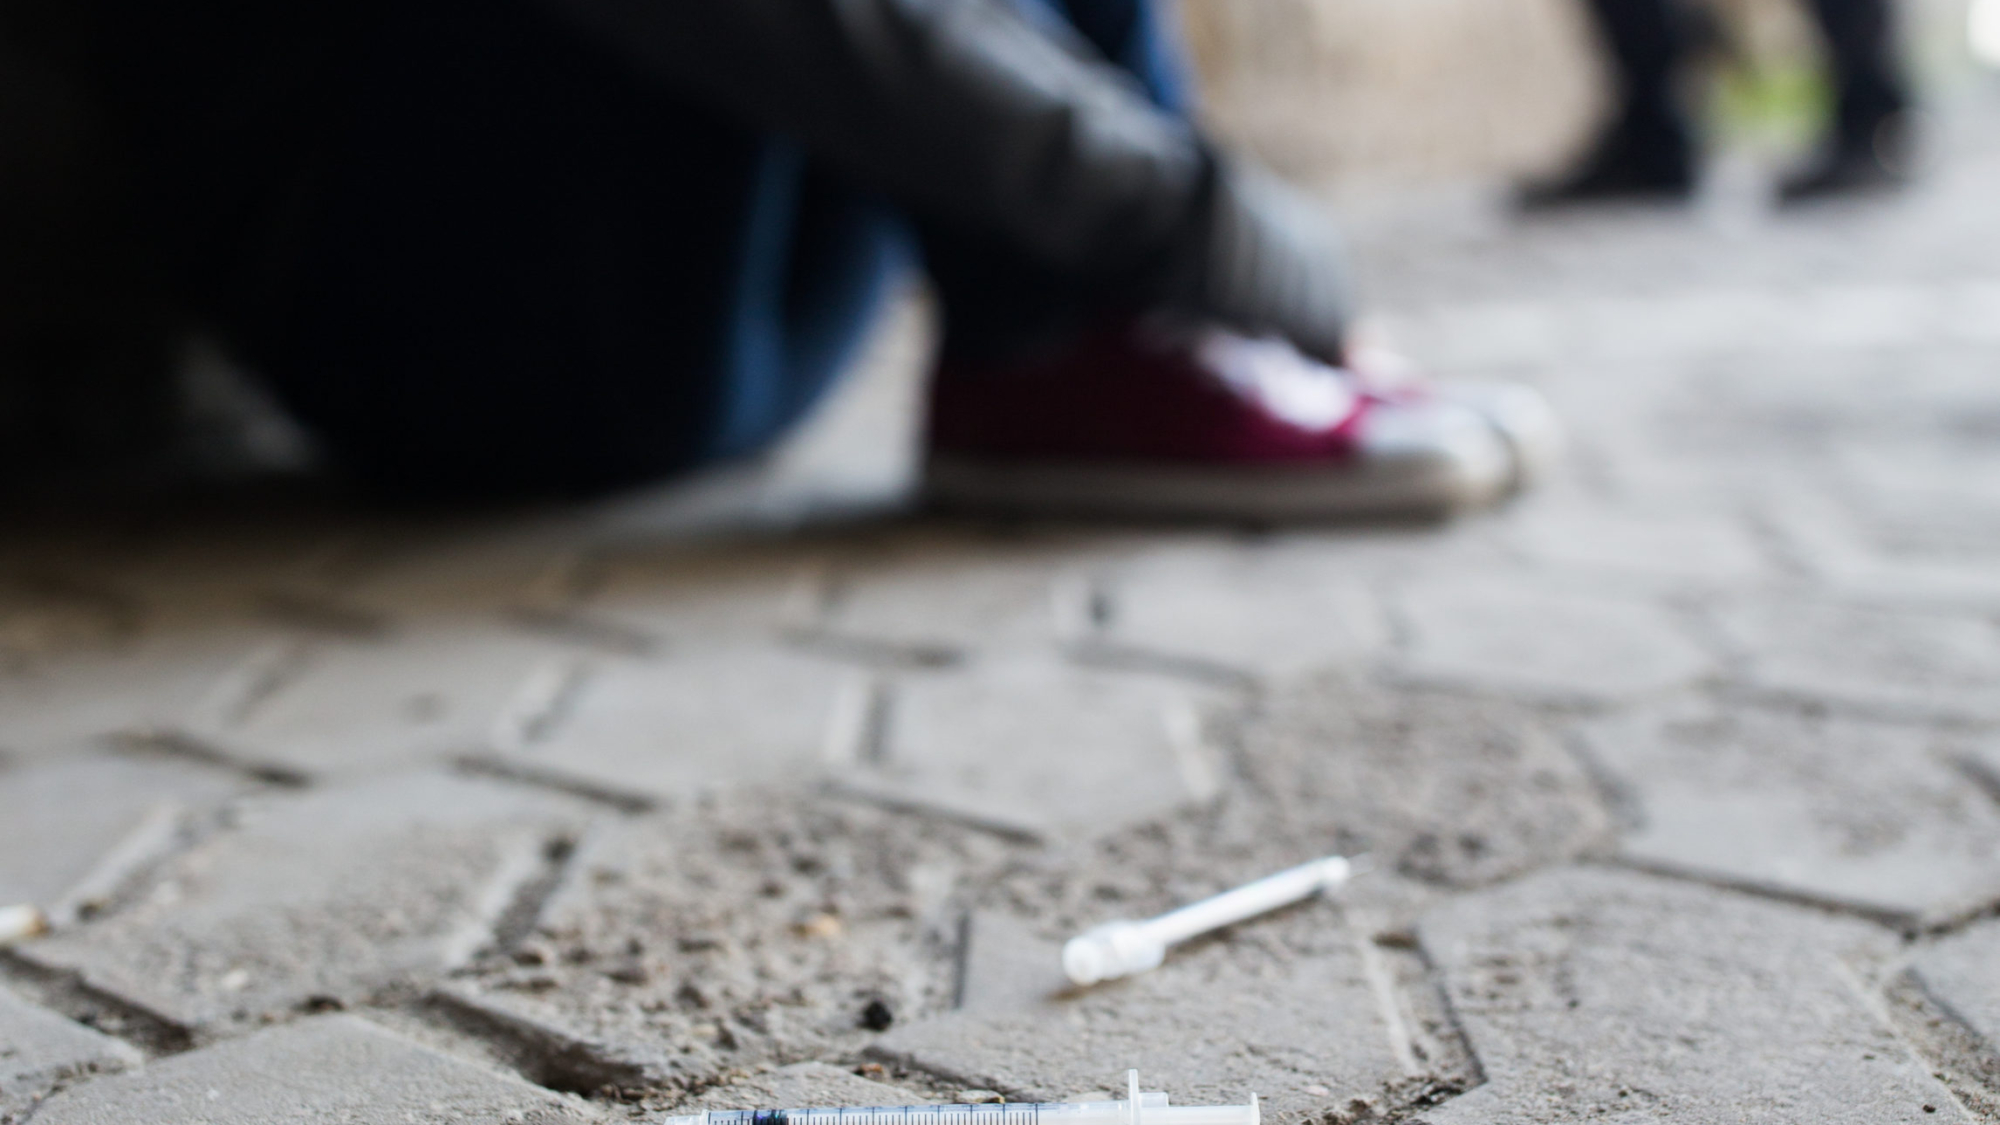 Top 10 Most Common Drugs Abused by Teens